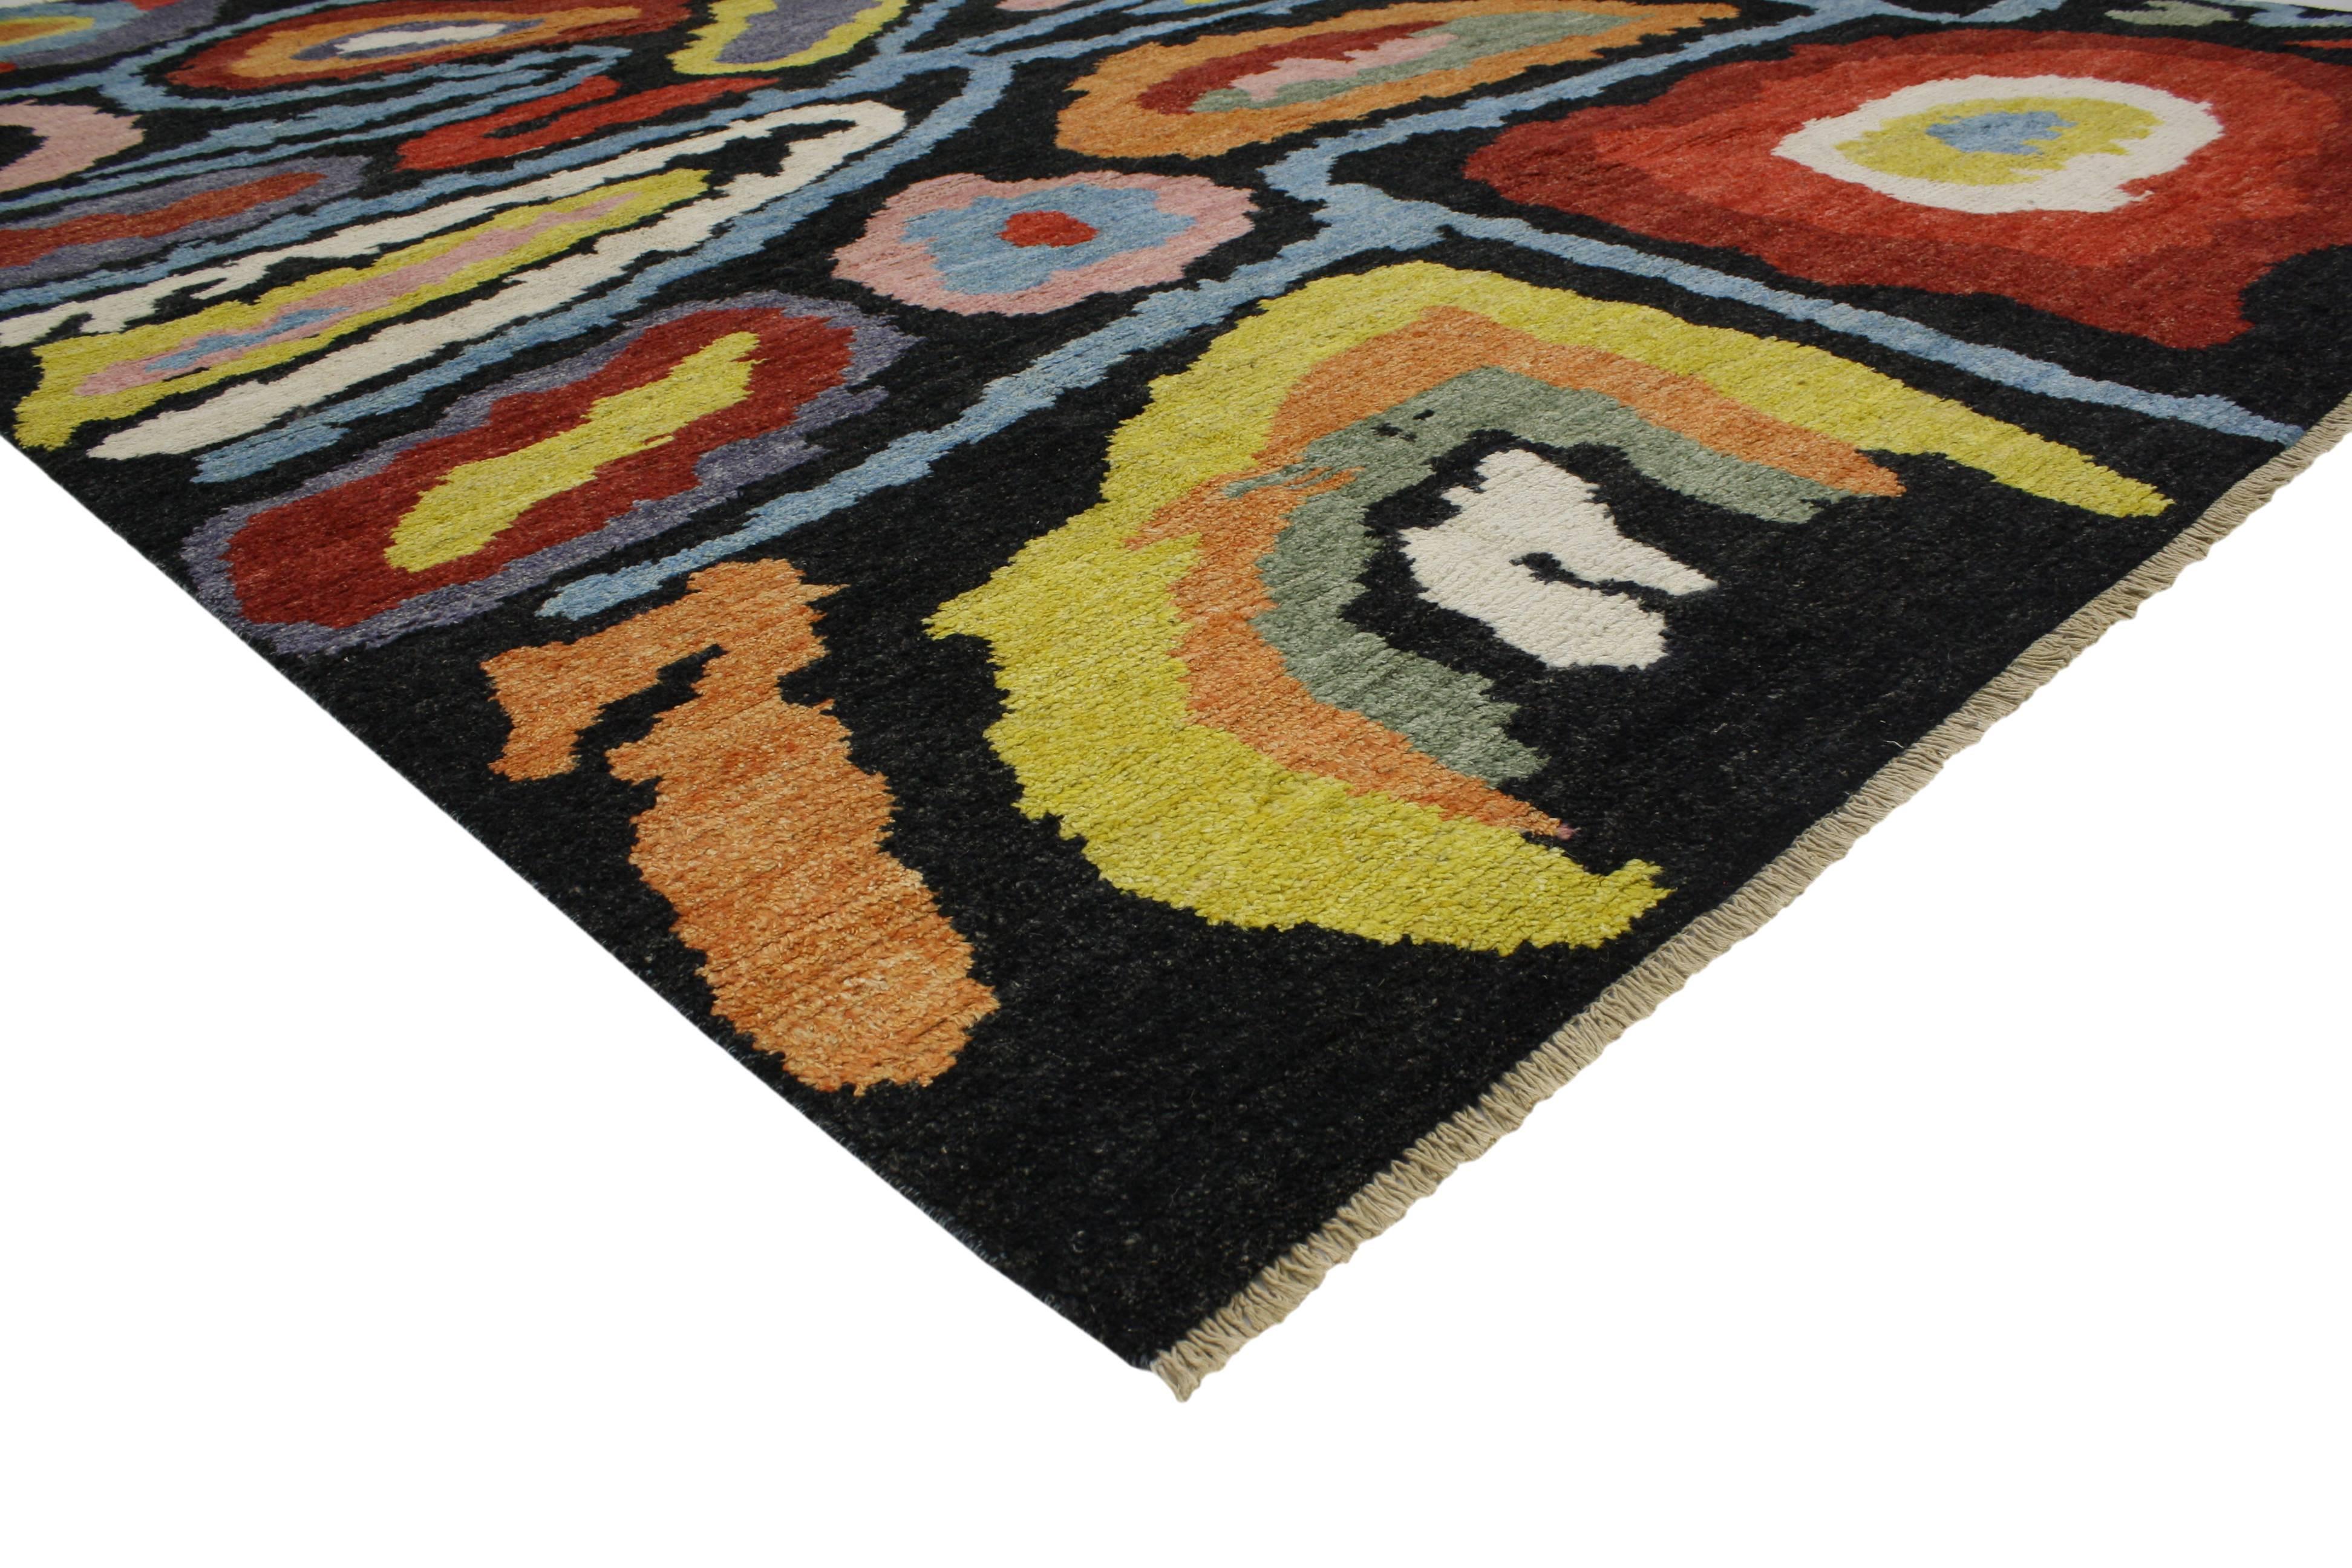 80371 New Colorful Contemporary Moroccan Rug with Postmodern Memphis Orphism Style. This hand knotted wool contemporary Moroccan area rug with Postmodern style showcases an all-over adventurous geometric pattern composed of ambiguous organic shapes